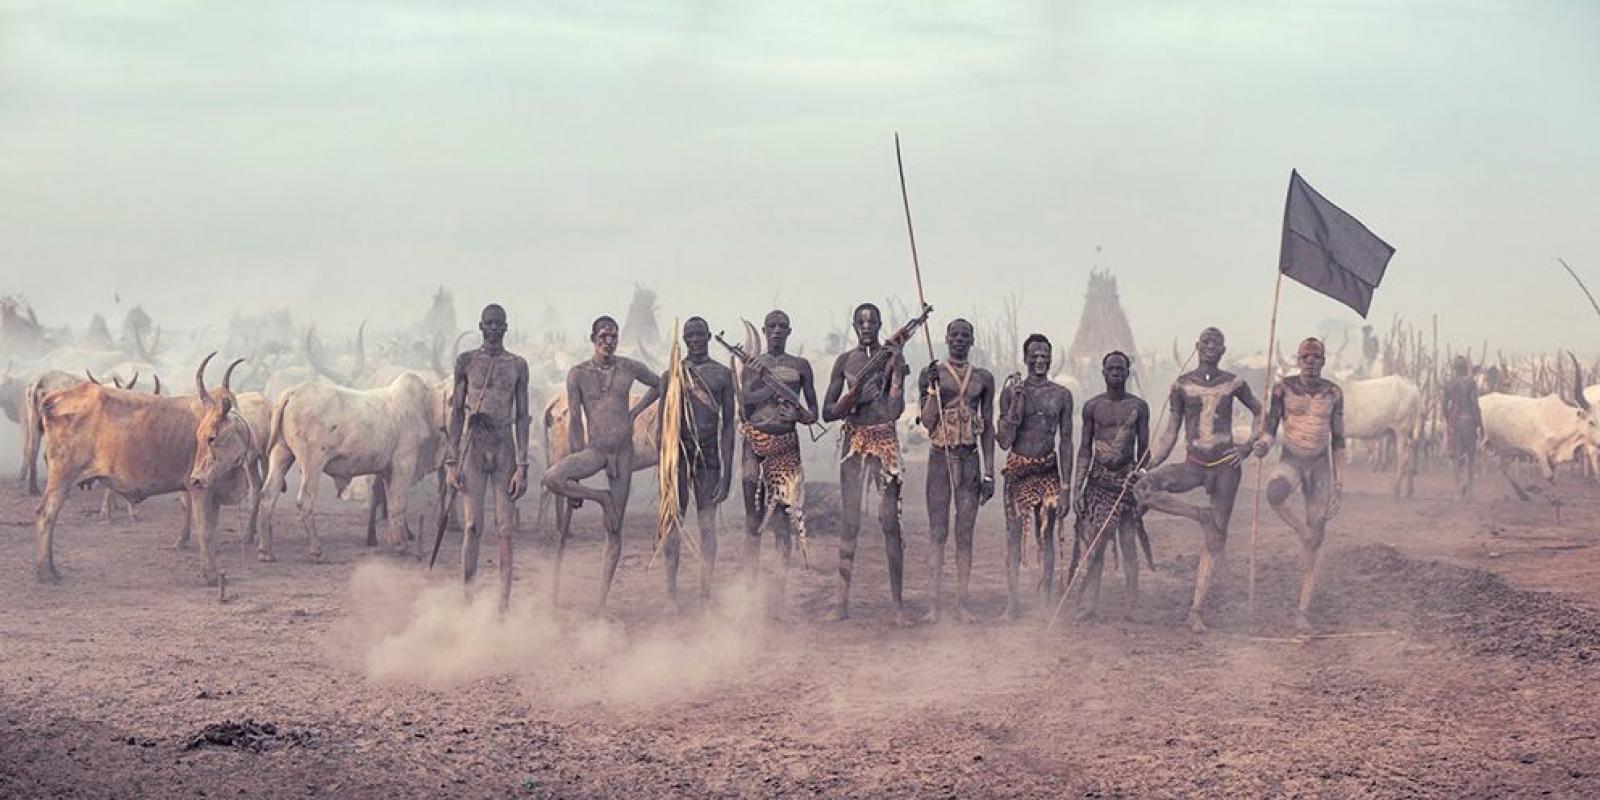 XXV 2 Bero, Mundari, Mayong

South Sudan is the world’s youngest nation – it became independent in 2011, after Sudan was torn apart by violence. The legacy of these unstable years could almost make you forget the impressive beauty and diversity of t